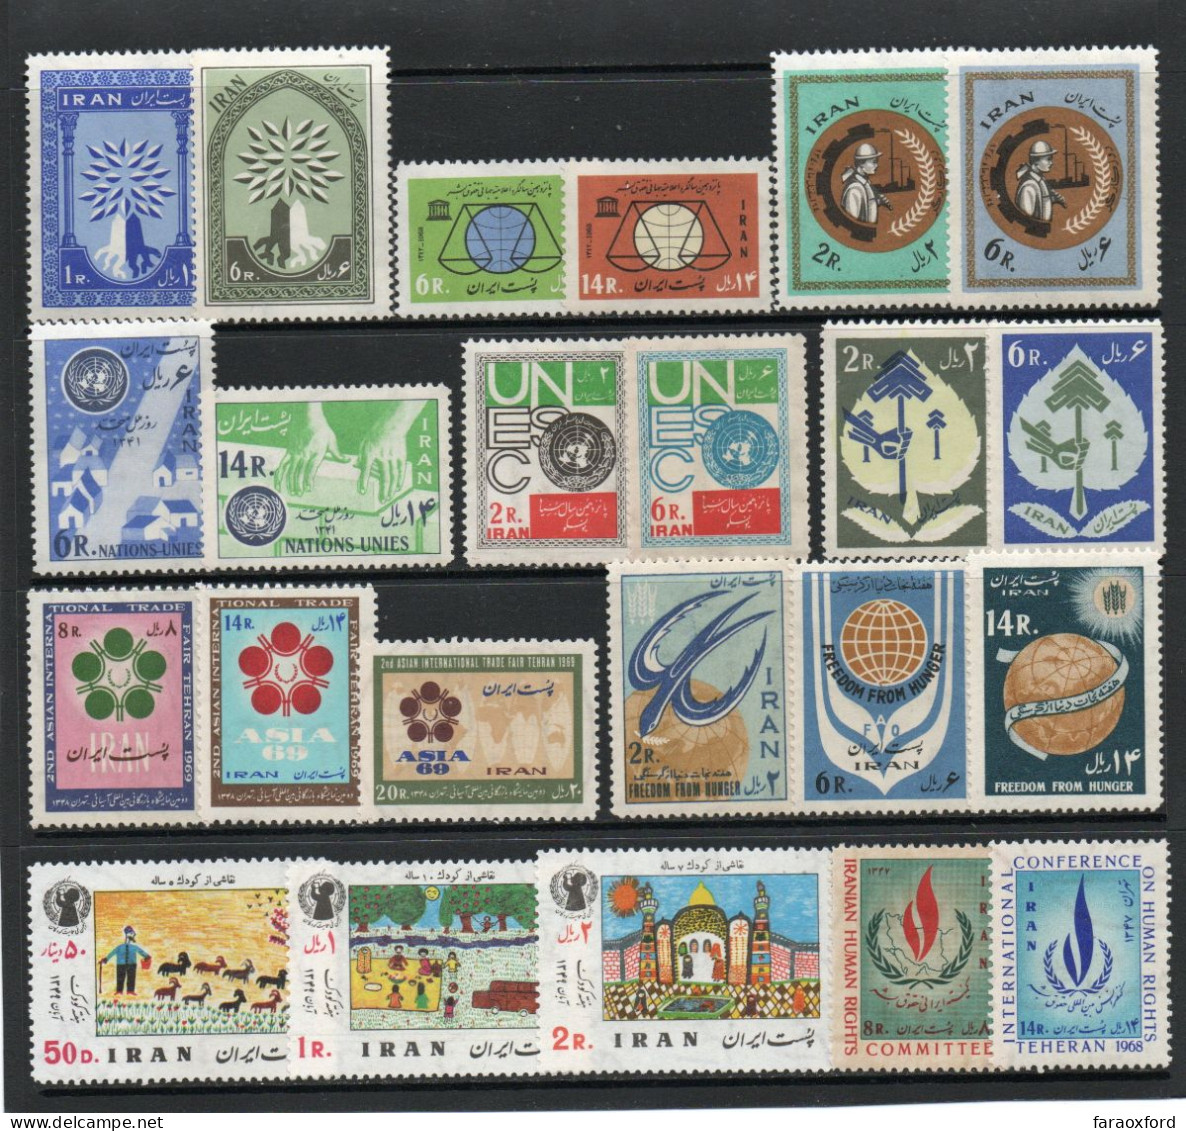 IRAN - ايران - PERSIA - 1960 To 1970 - COLLECTION OF 10 COMPLETE SETS OF STAMPS - MINT NOT HINGED - LOT 5 - Iran